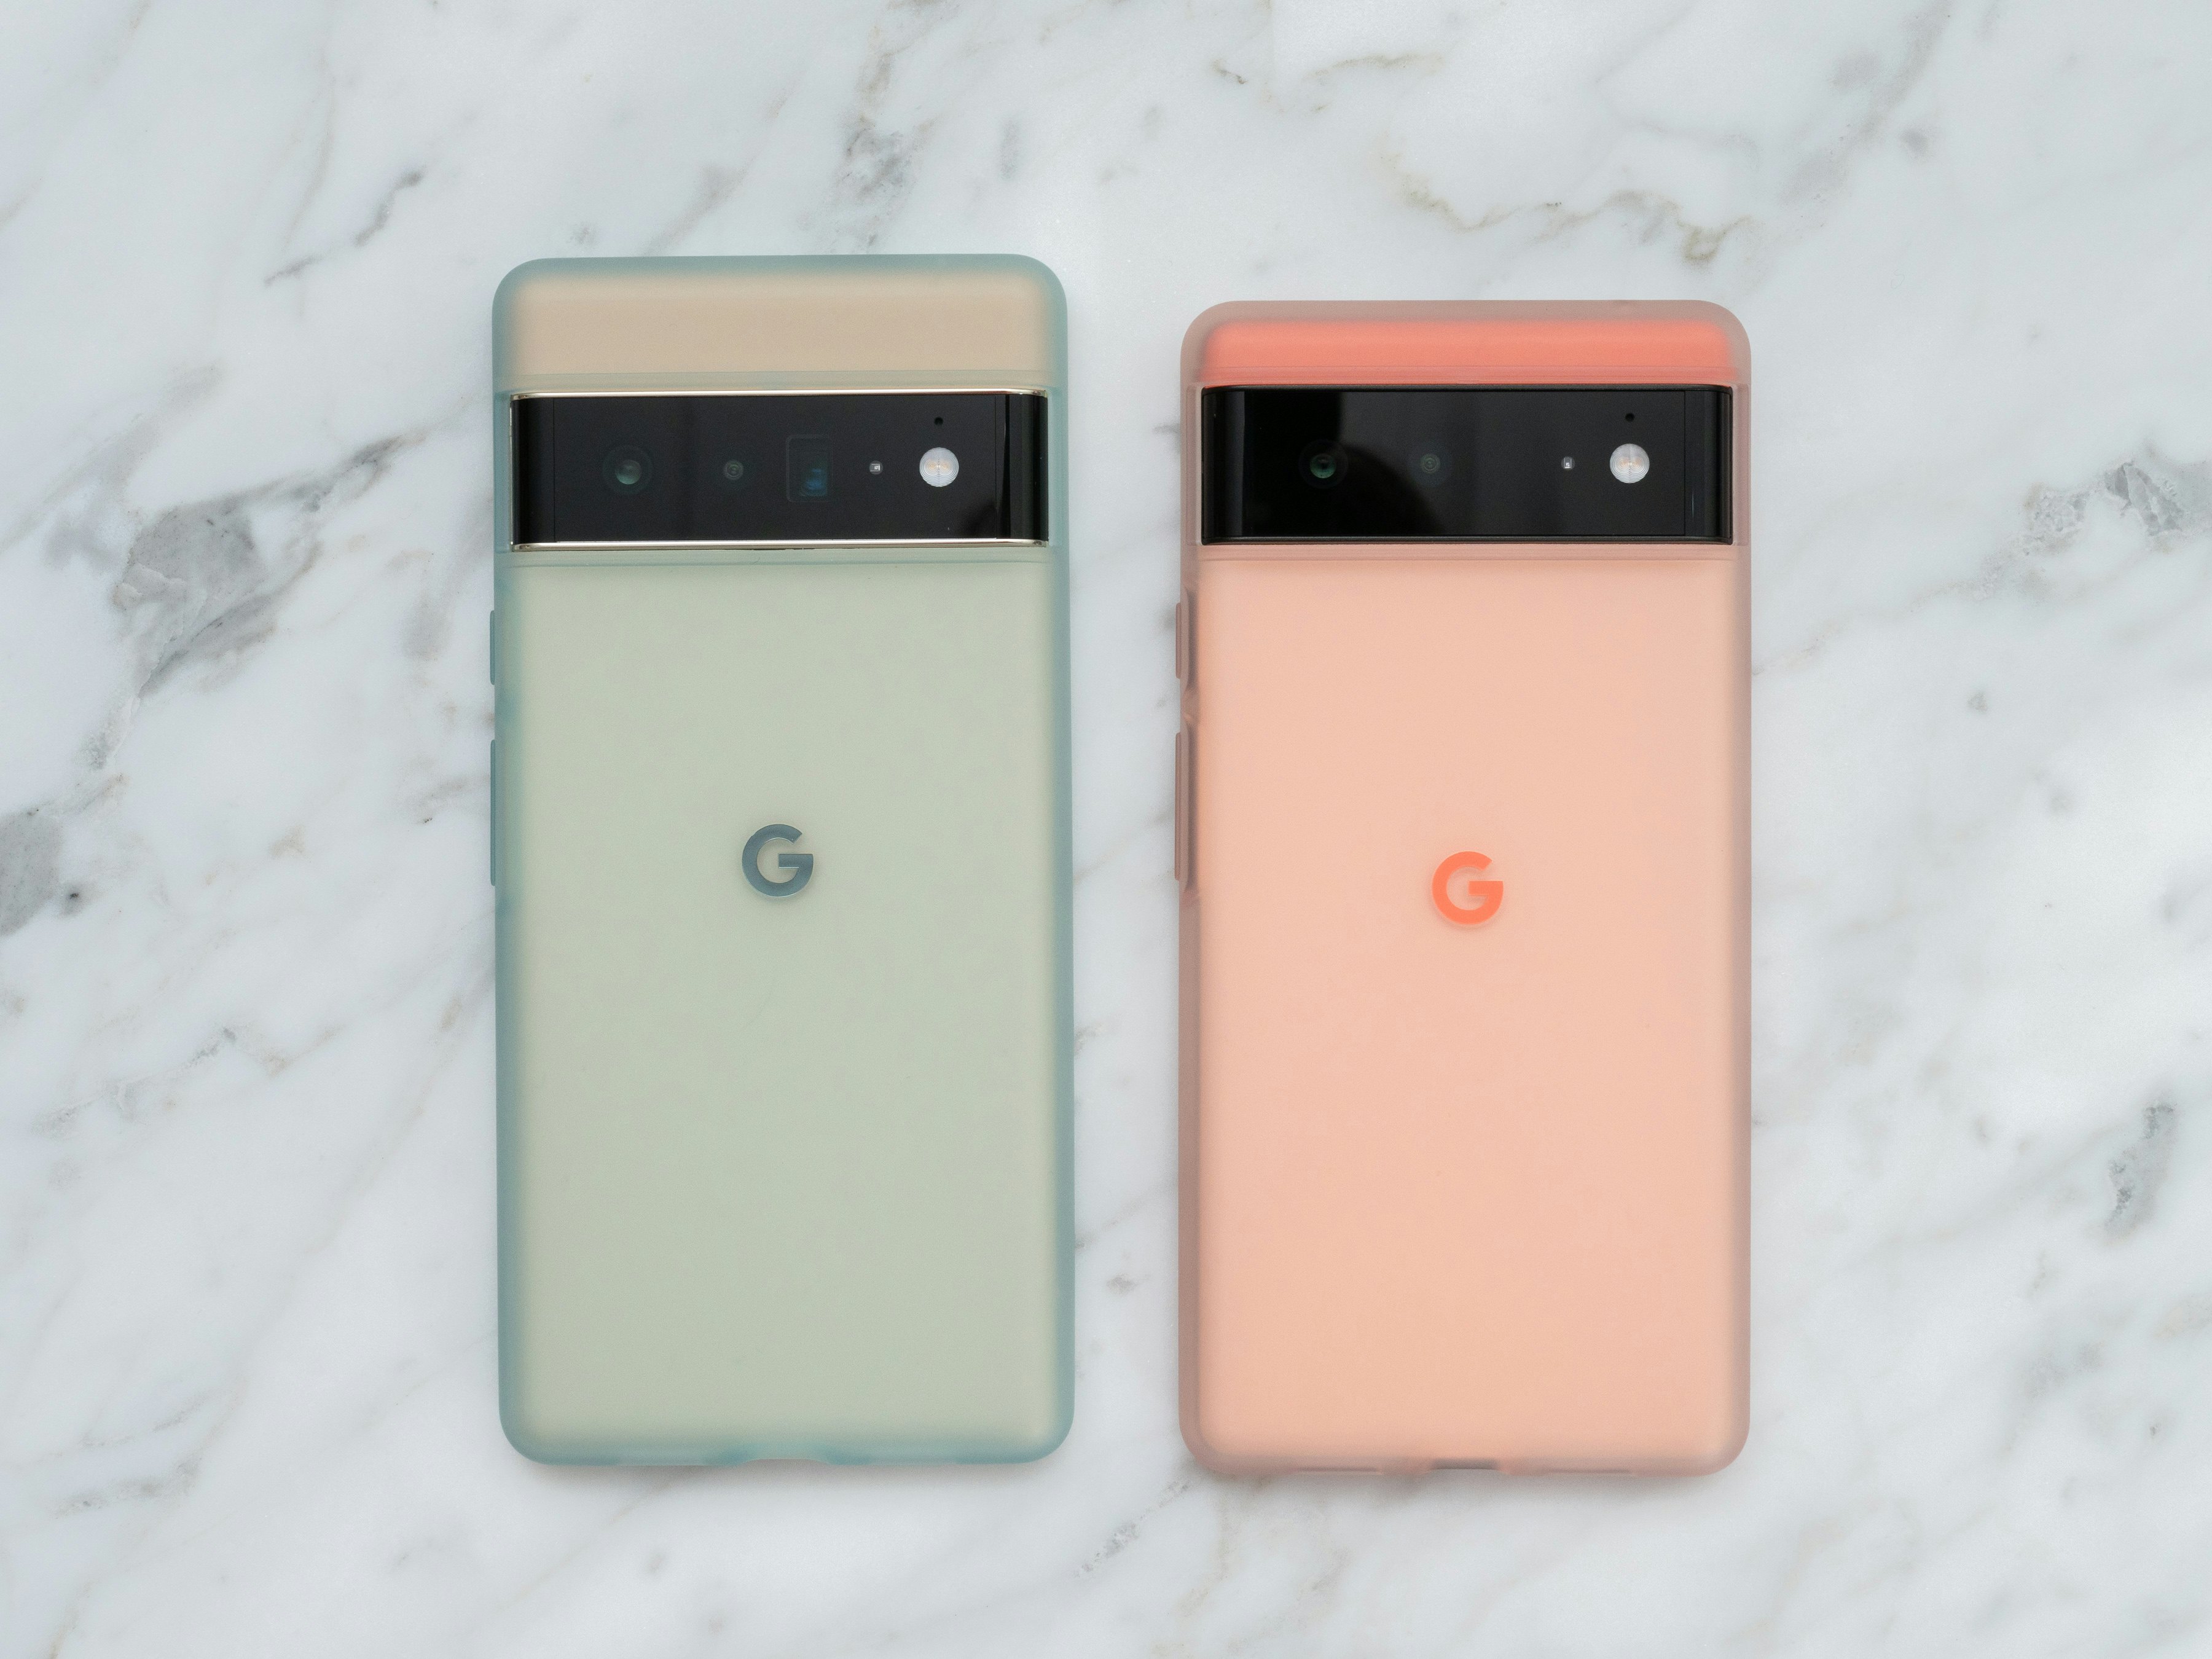 Google Pixel 6 vs Pixel 6 Pro: These are the biggest differences